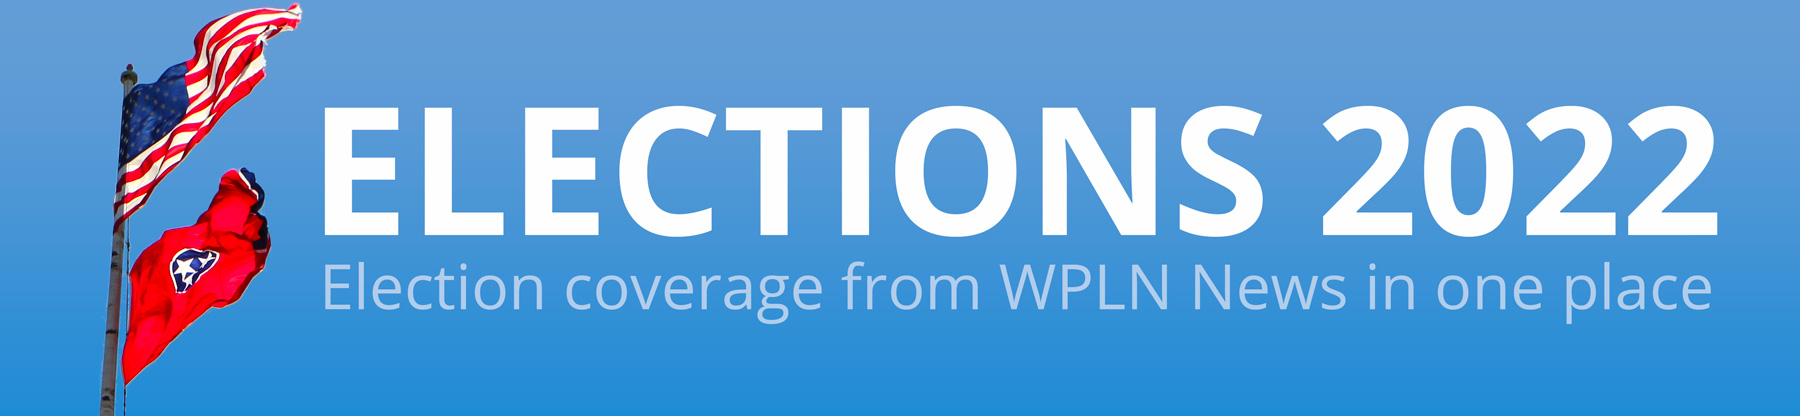 Elections 2022, all election coverage from WPLN News in one place